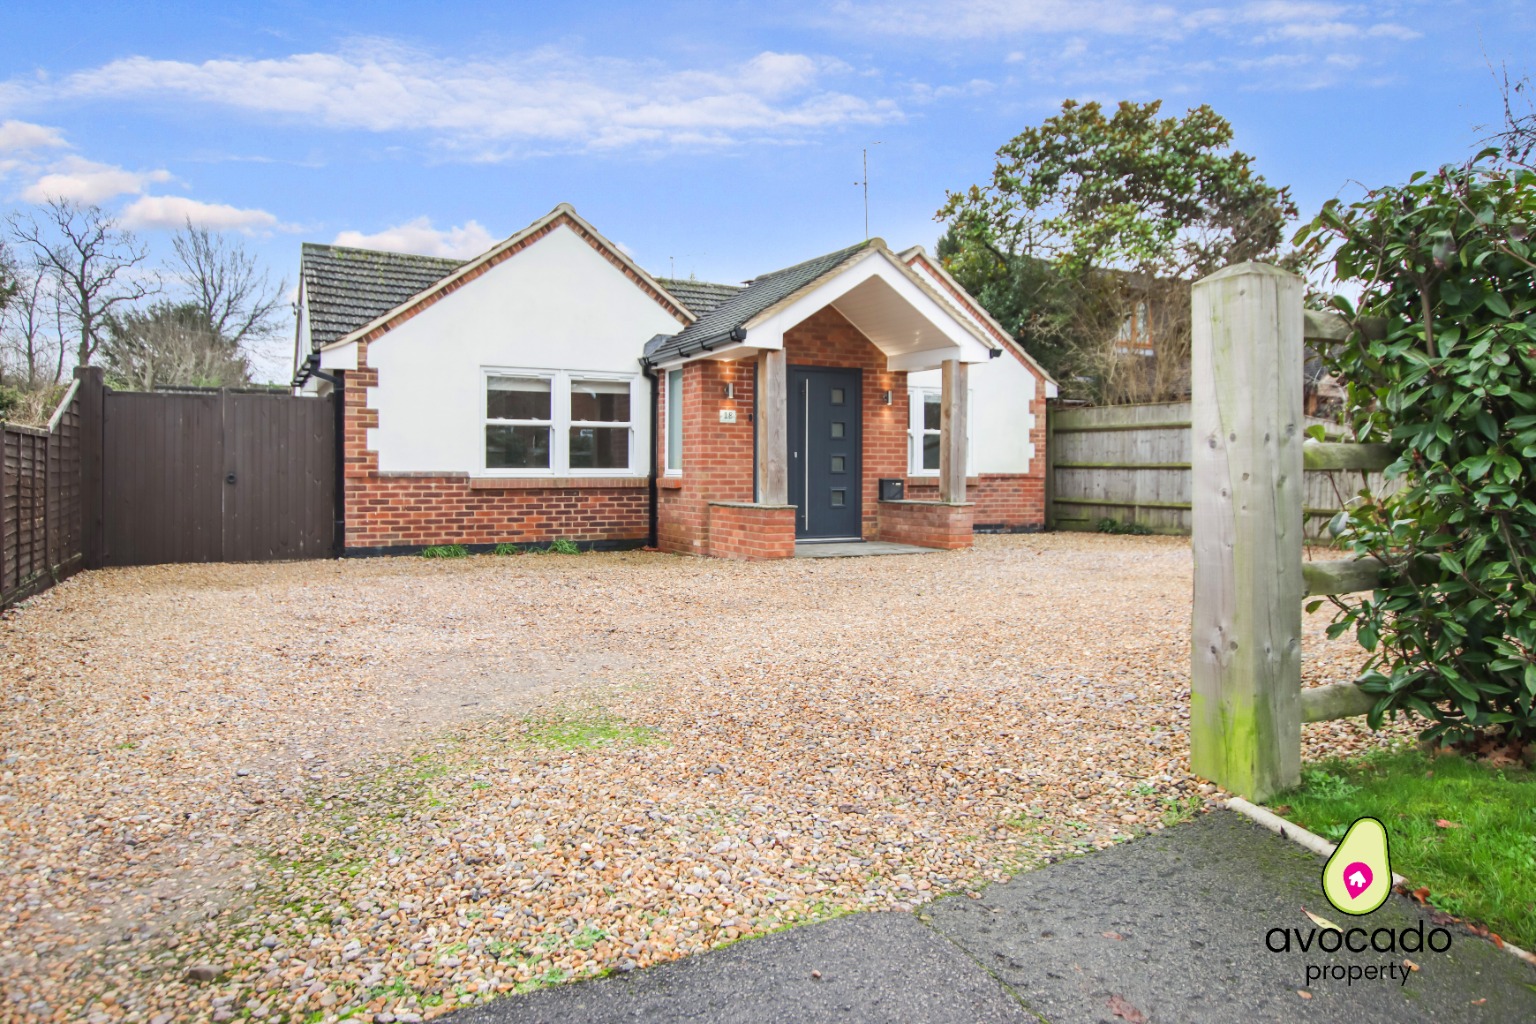 5 bed bungalow for sale in Darby Green Lane, Camberley 0